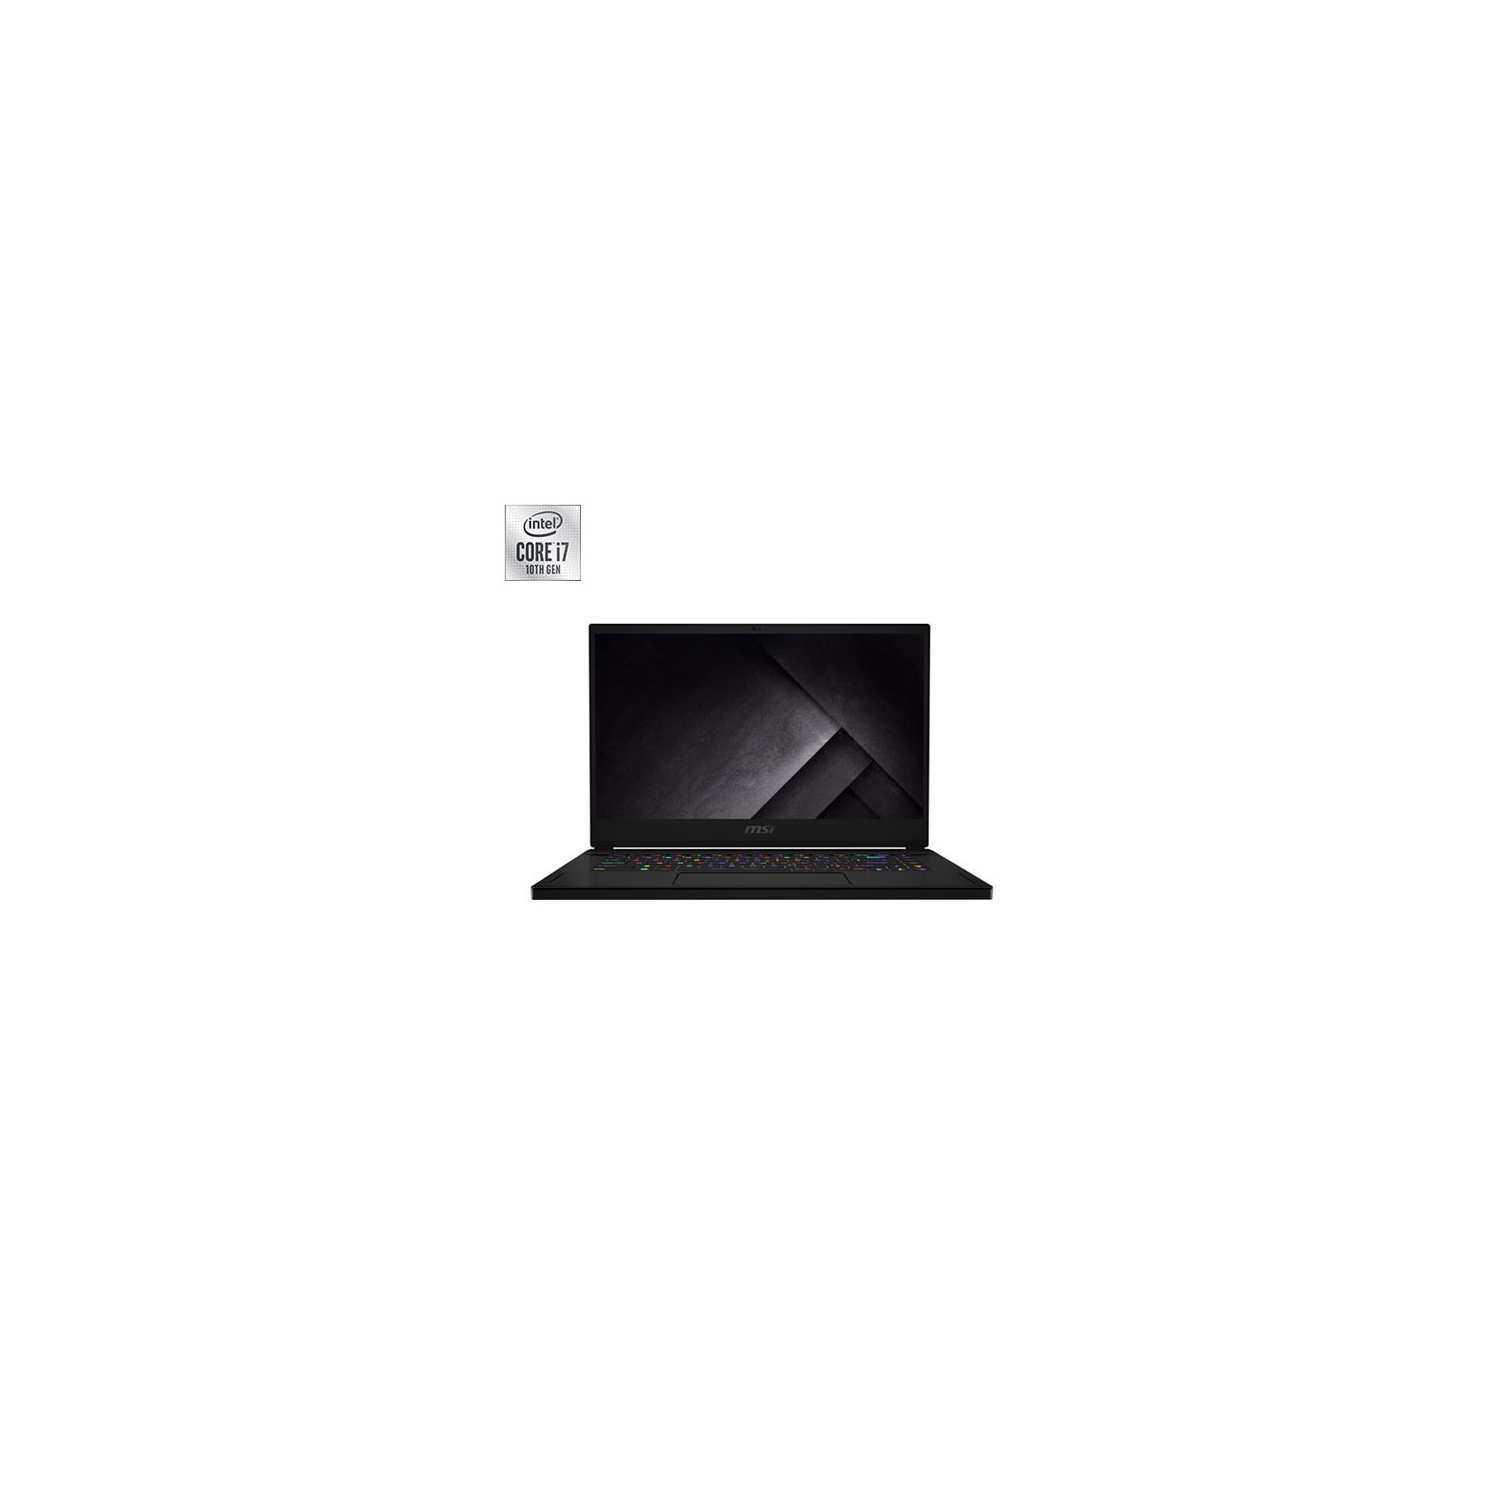 Refurbished (Excellent) - MSI GS66 Stealth 15.6" Gaming Laptop (Intel i7-10750H/1TB SSD/16GB RAM/GeForce RTX2060)